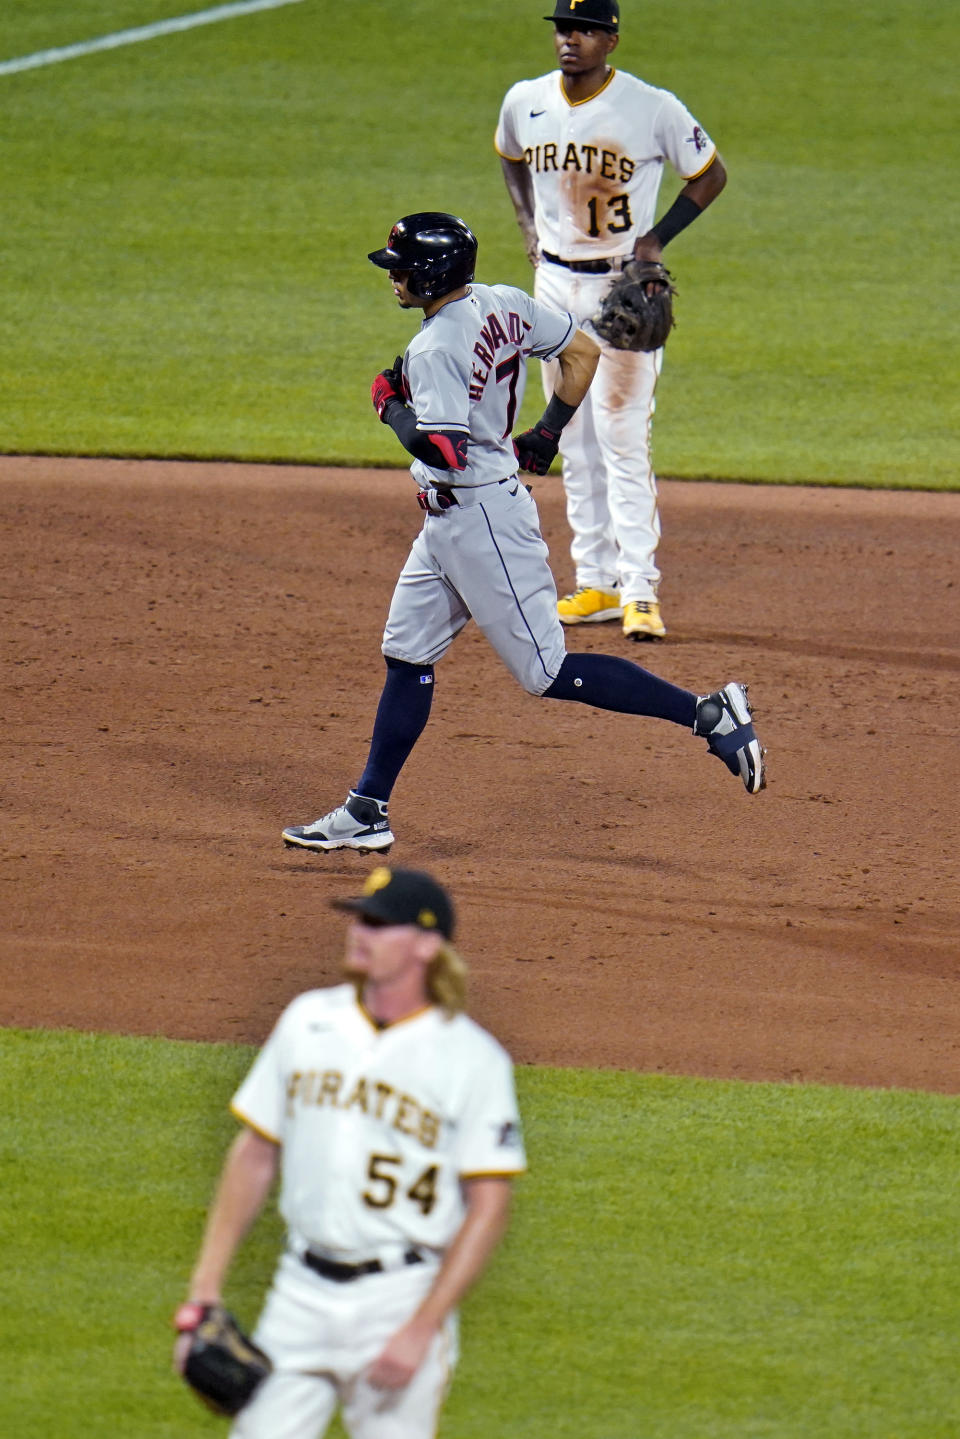 Cleveland Indians' Cesar Hernandez (7) runs the bases after hitting a grand slam off Pittsburgh Pirates relief pitcher Sam Howard (54) during the seventh inning of a baseball game in Pittsburgh, Friday, June 18, 2021. (AP Photo/Gene J. Puskar)